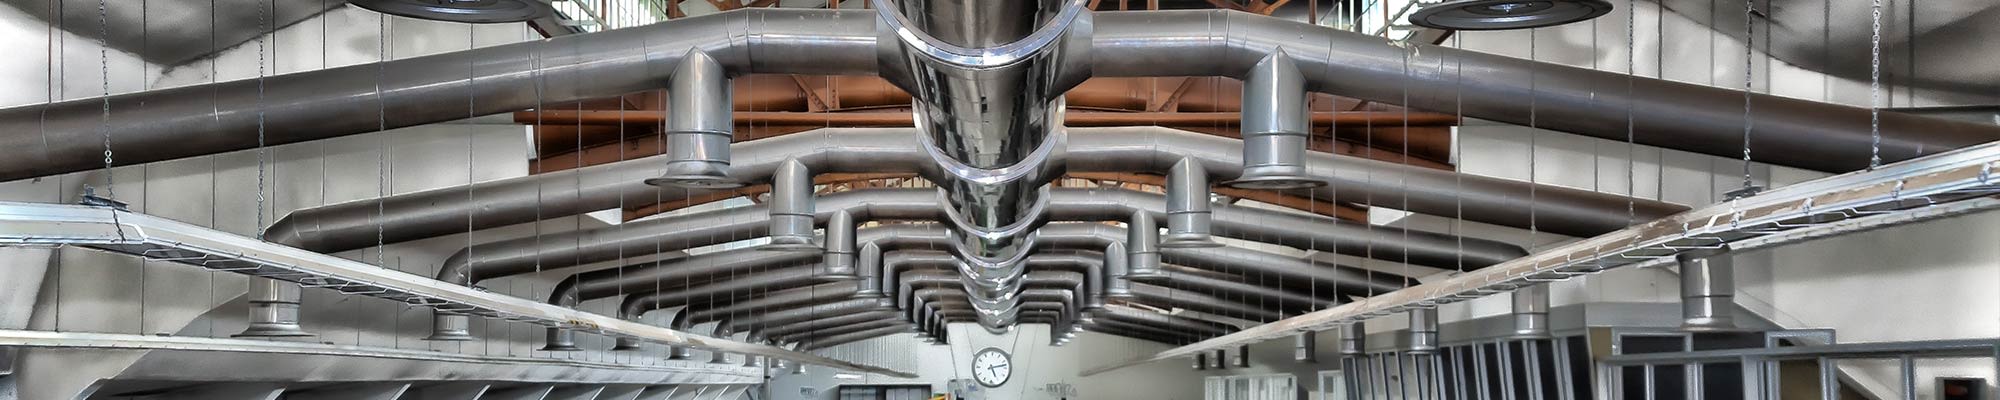 HVAC Monitoring and control systems for HVAC